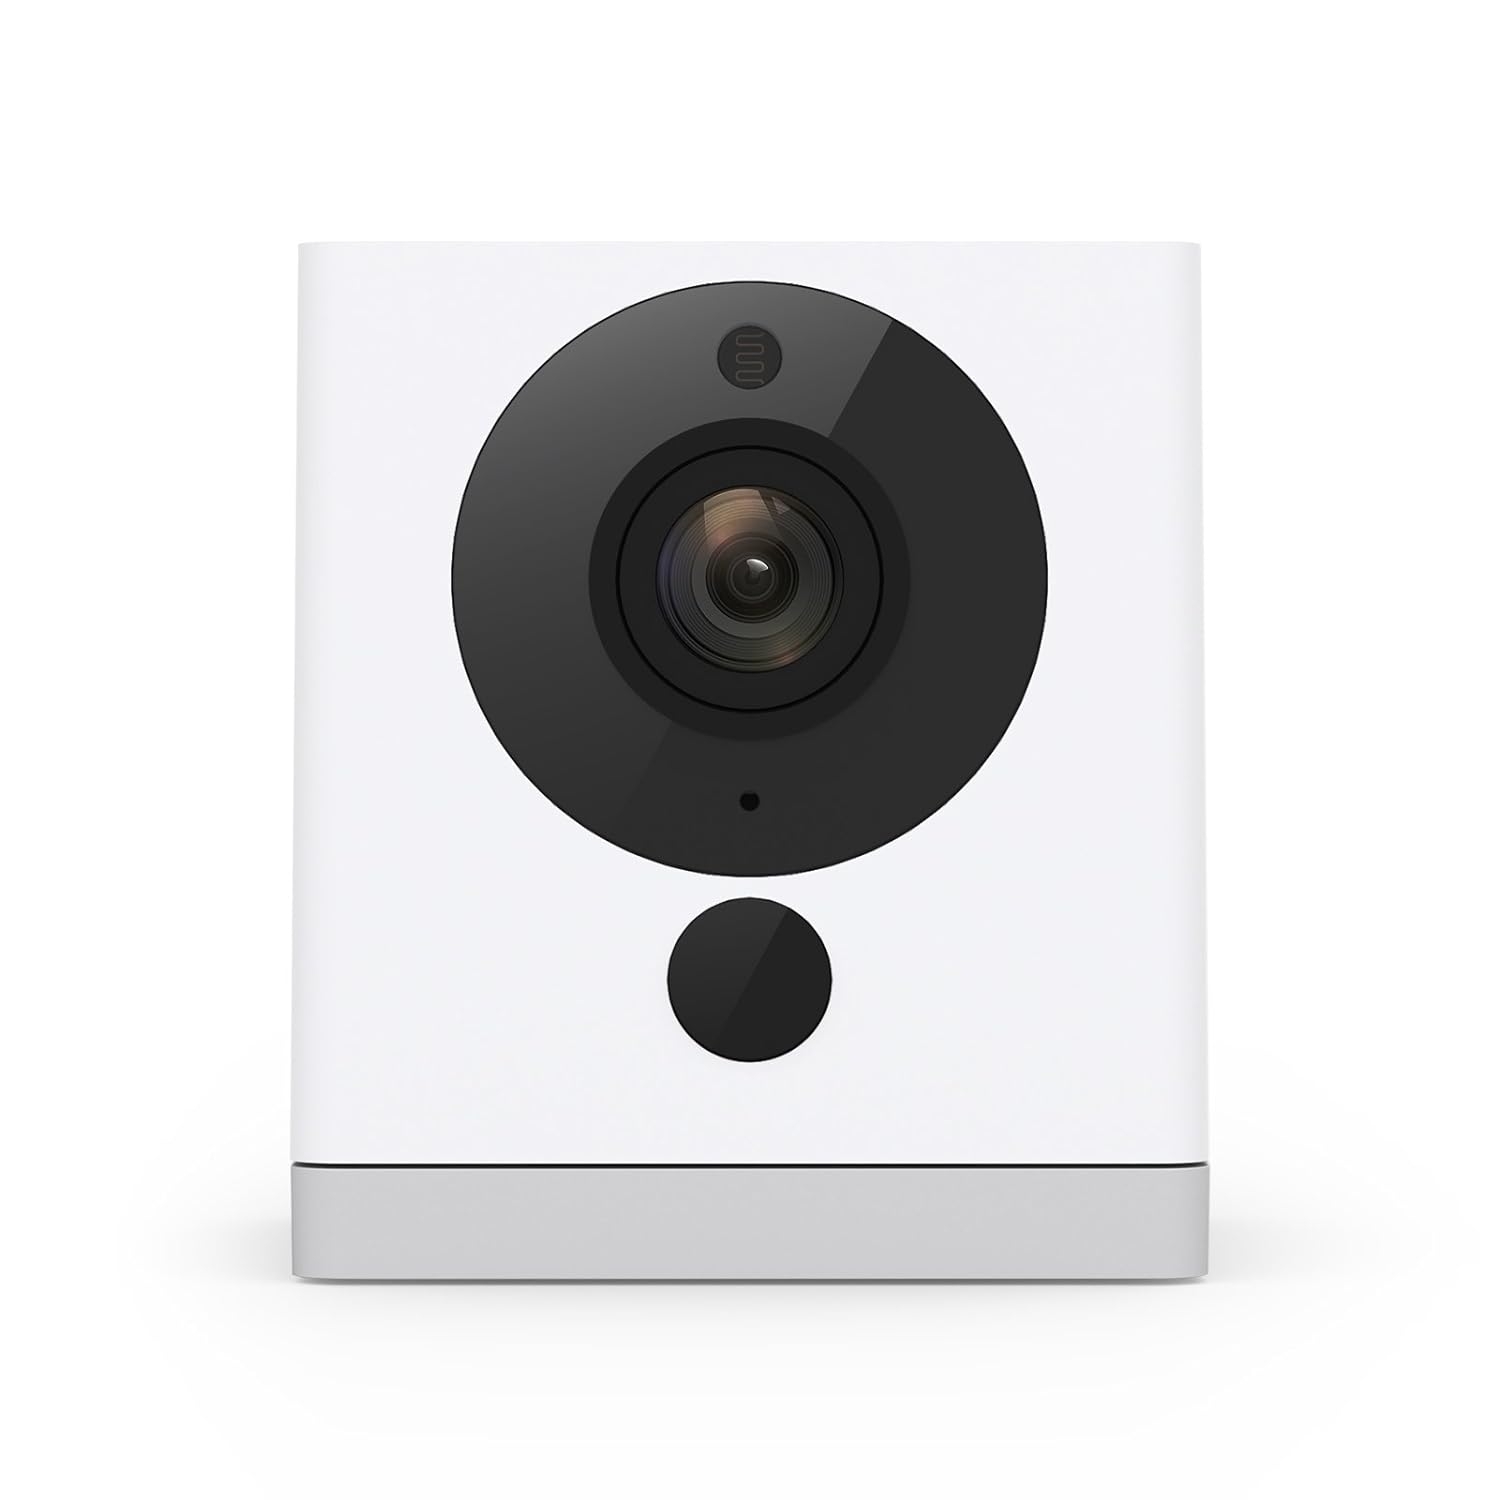 Wyze Cam 1080p HD Indoor Wireless Smart Home Camera with Night Vision, 2-Way Audio, Person Detection, Works with Alexa & the Google Assistant